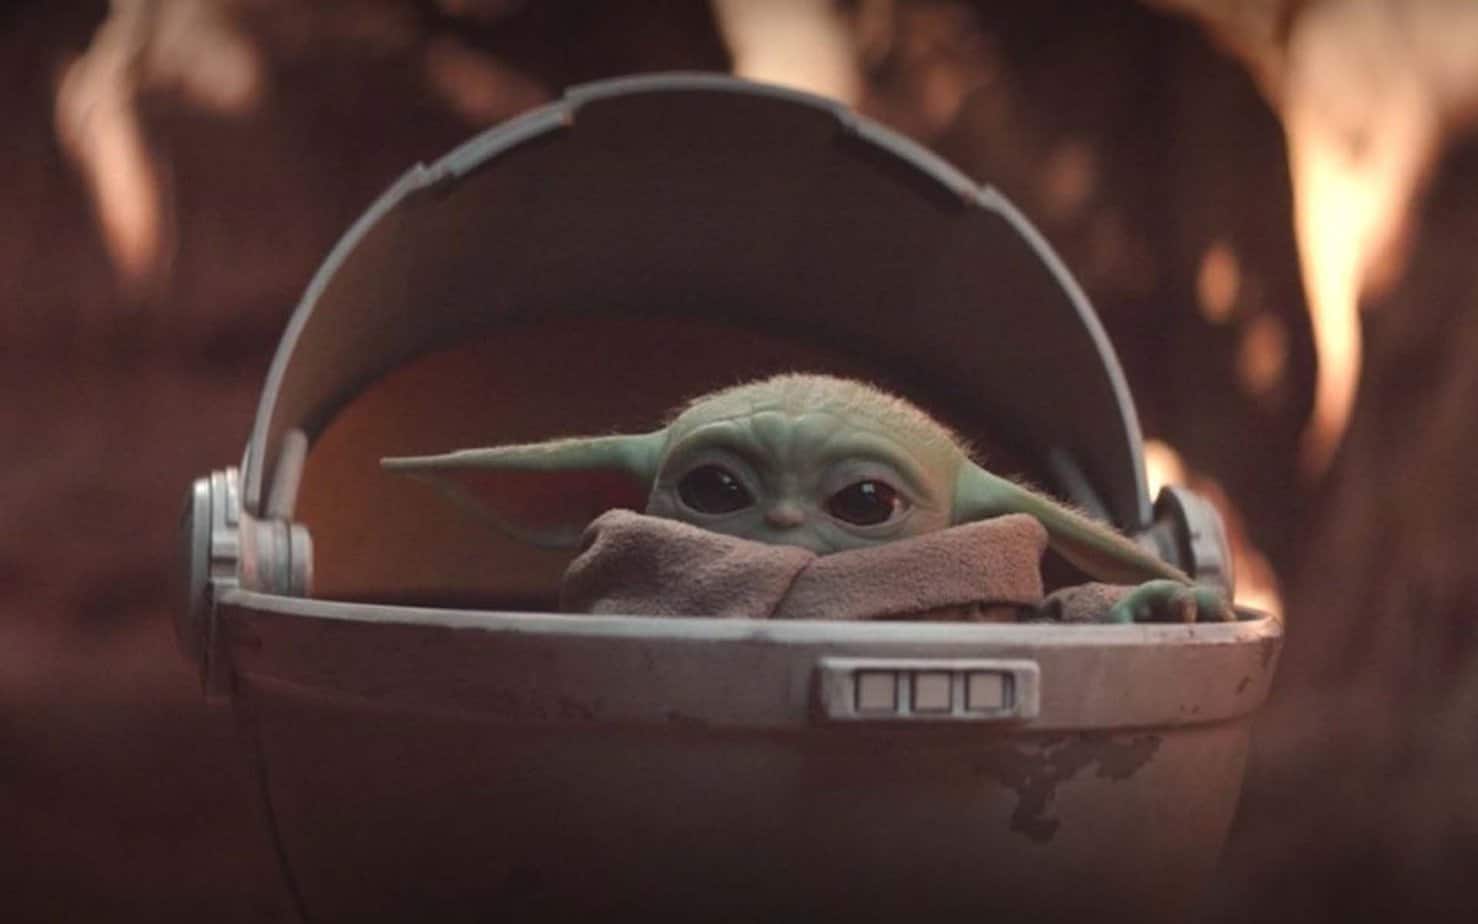 BABY YODA ISN'T CUTE - One actor from The Mandalorian has a less than popular opinion